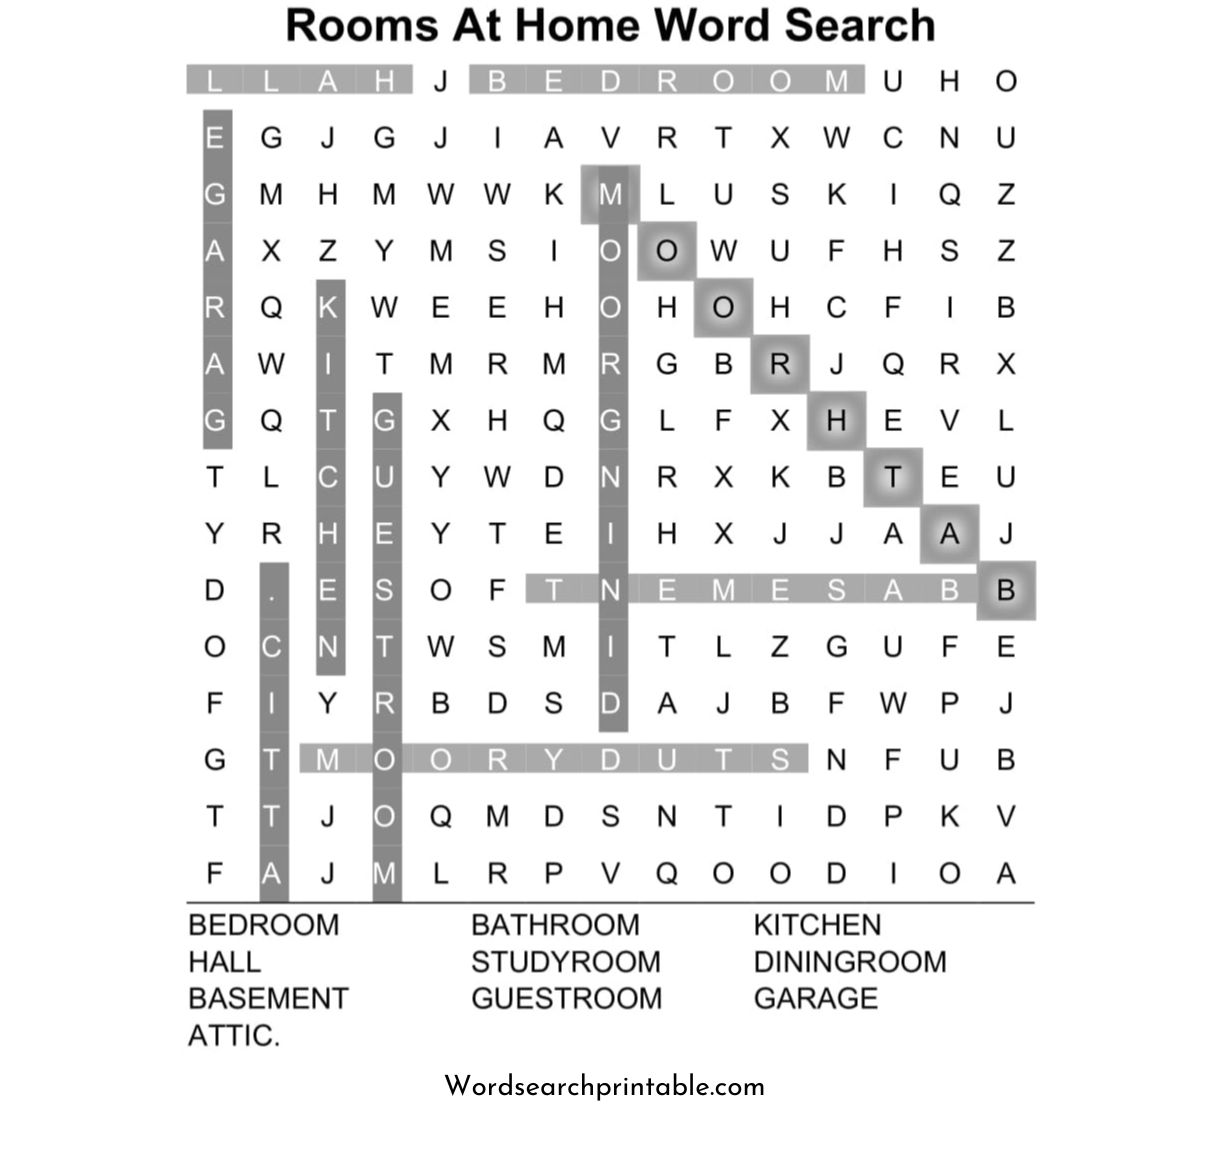 rooms at home word search puzzle solution